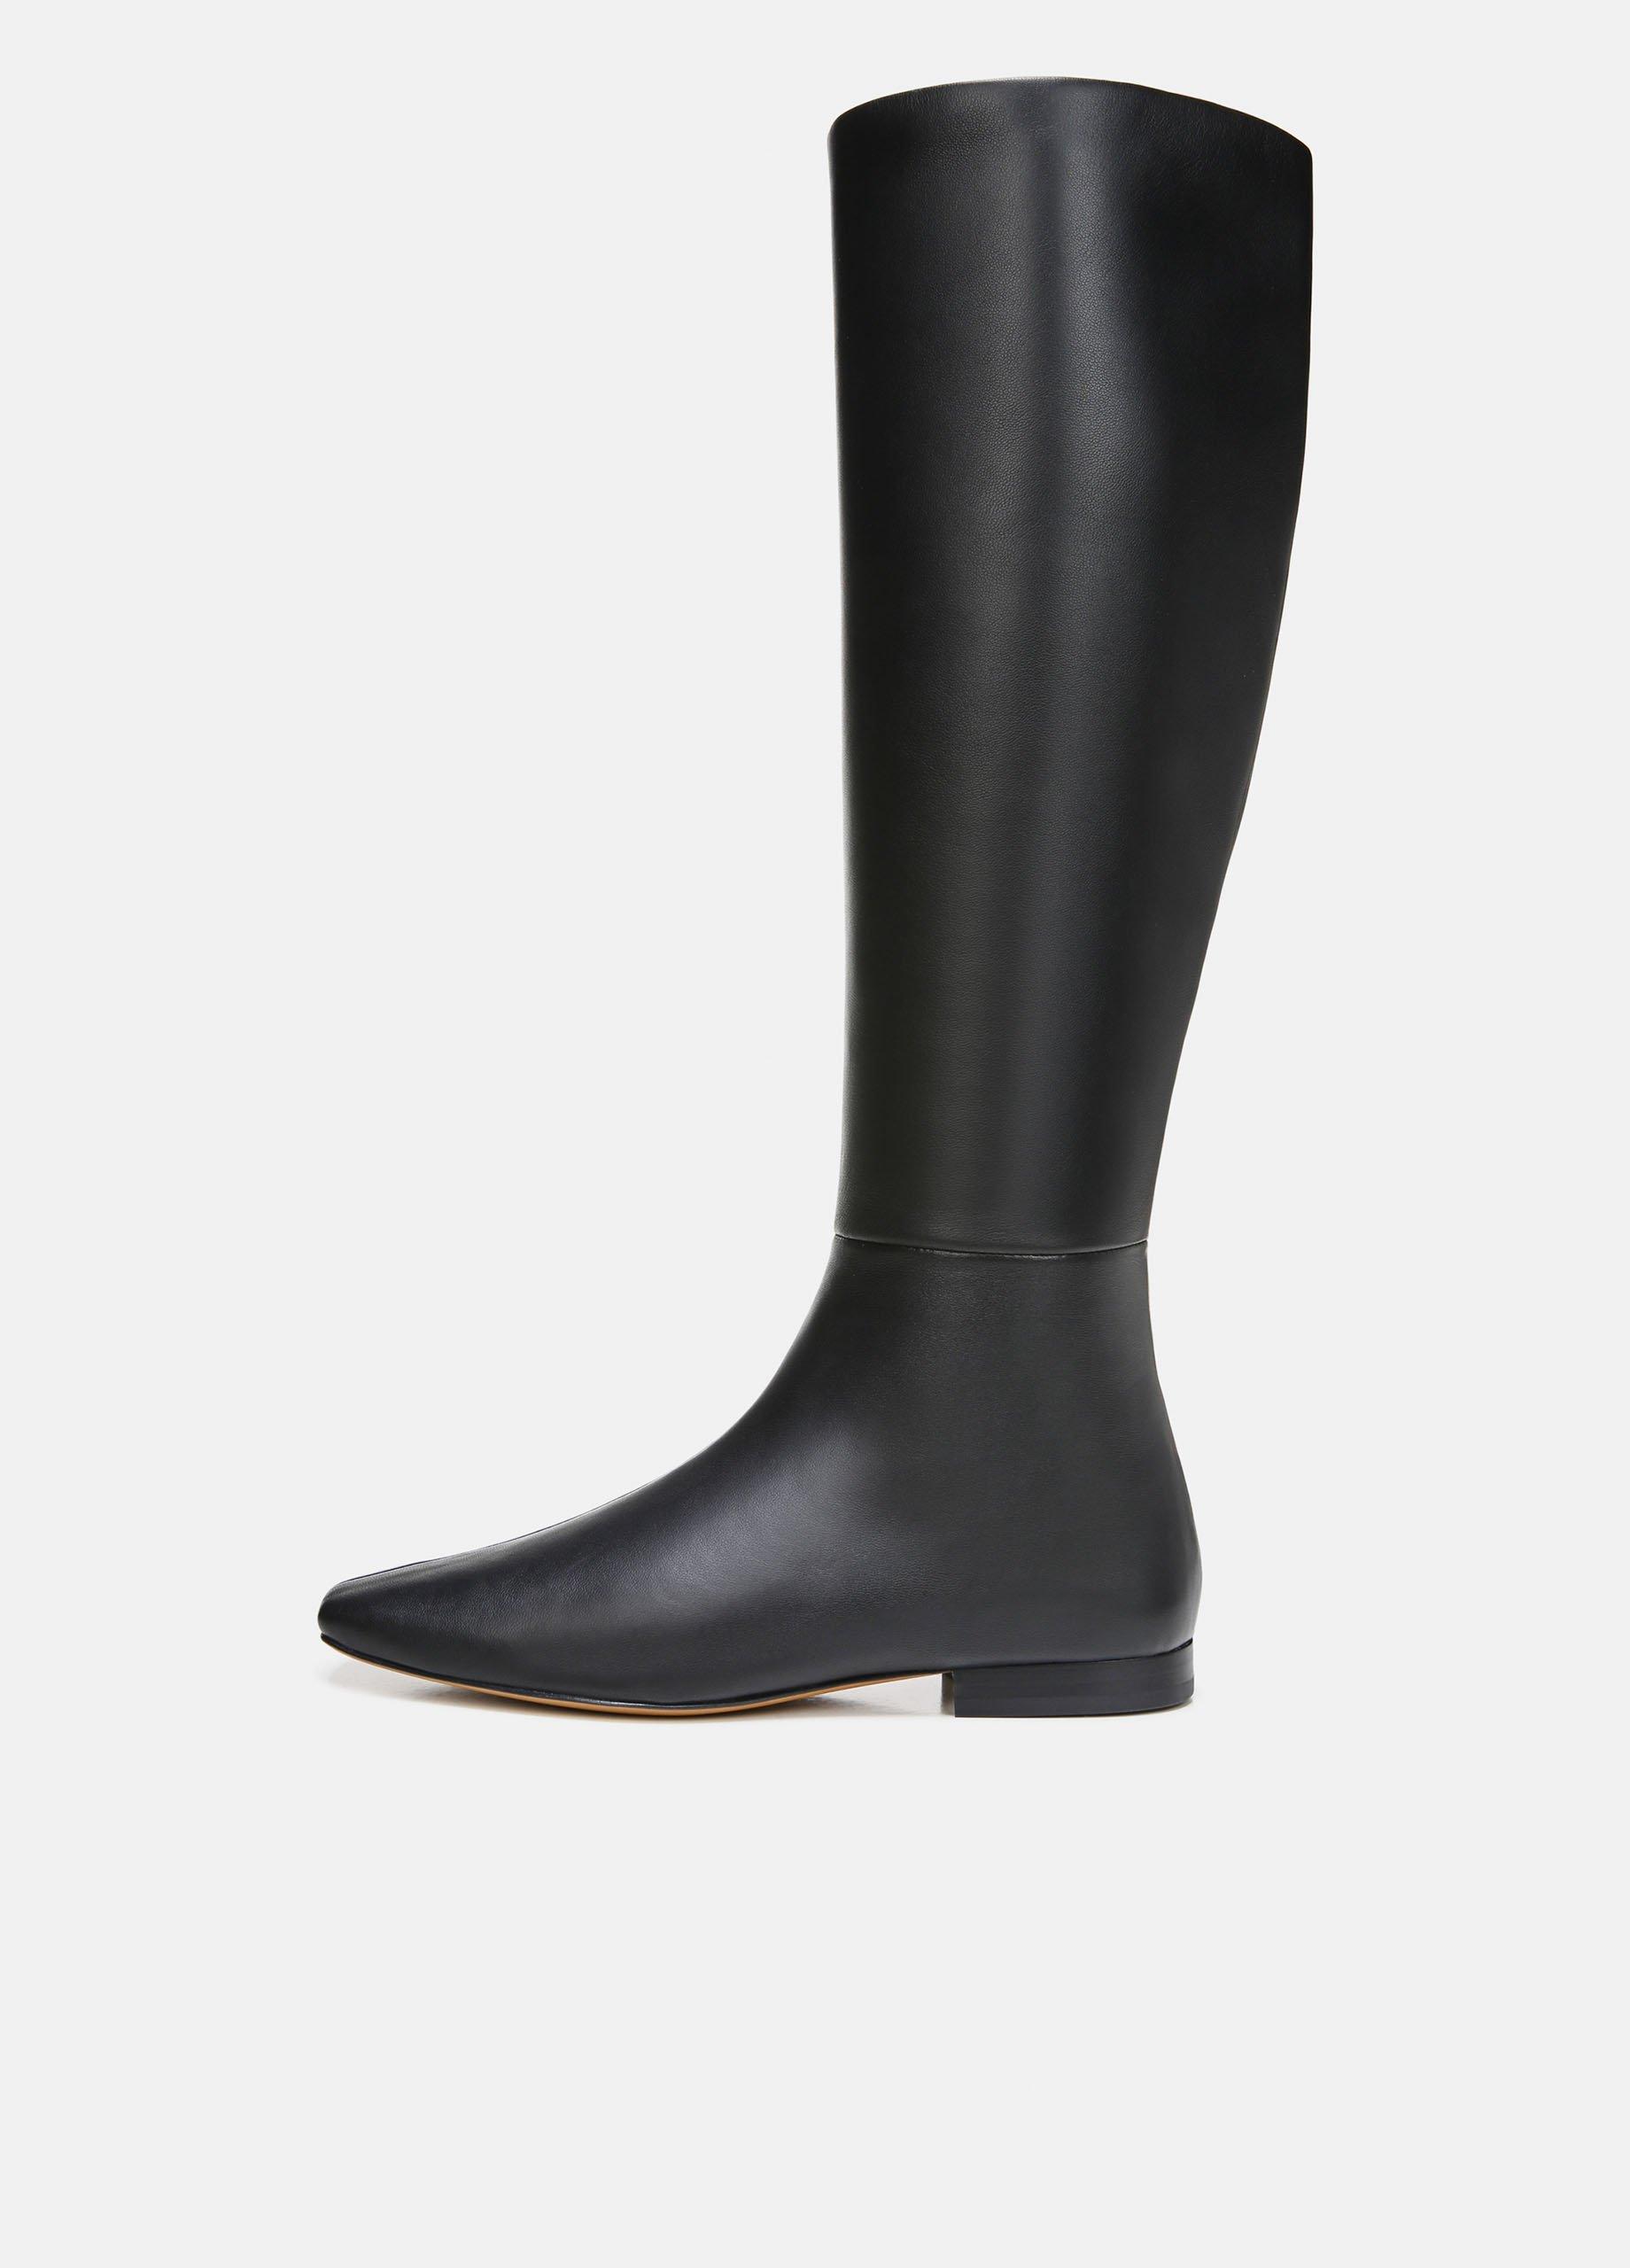 Nella Leather Boot for Women | Vince